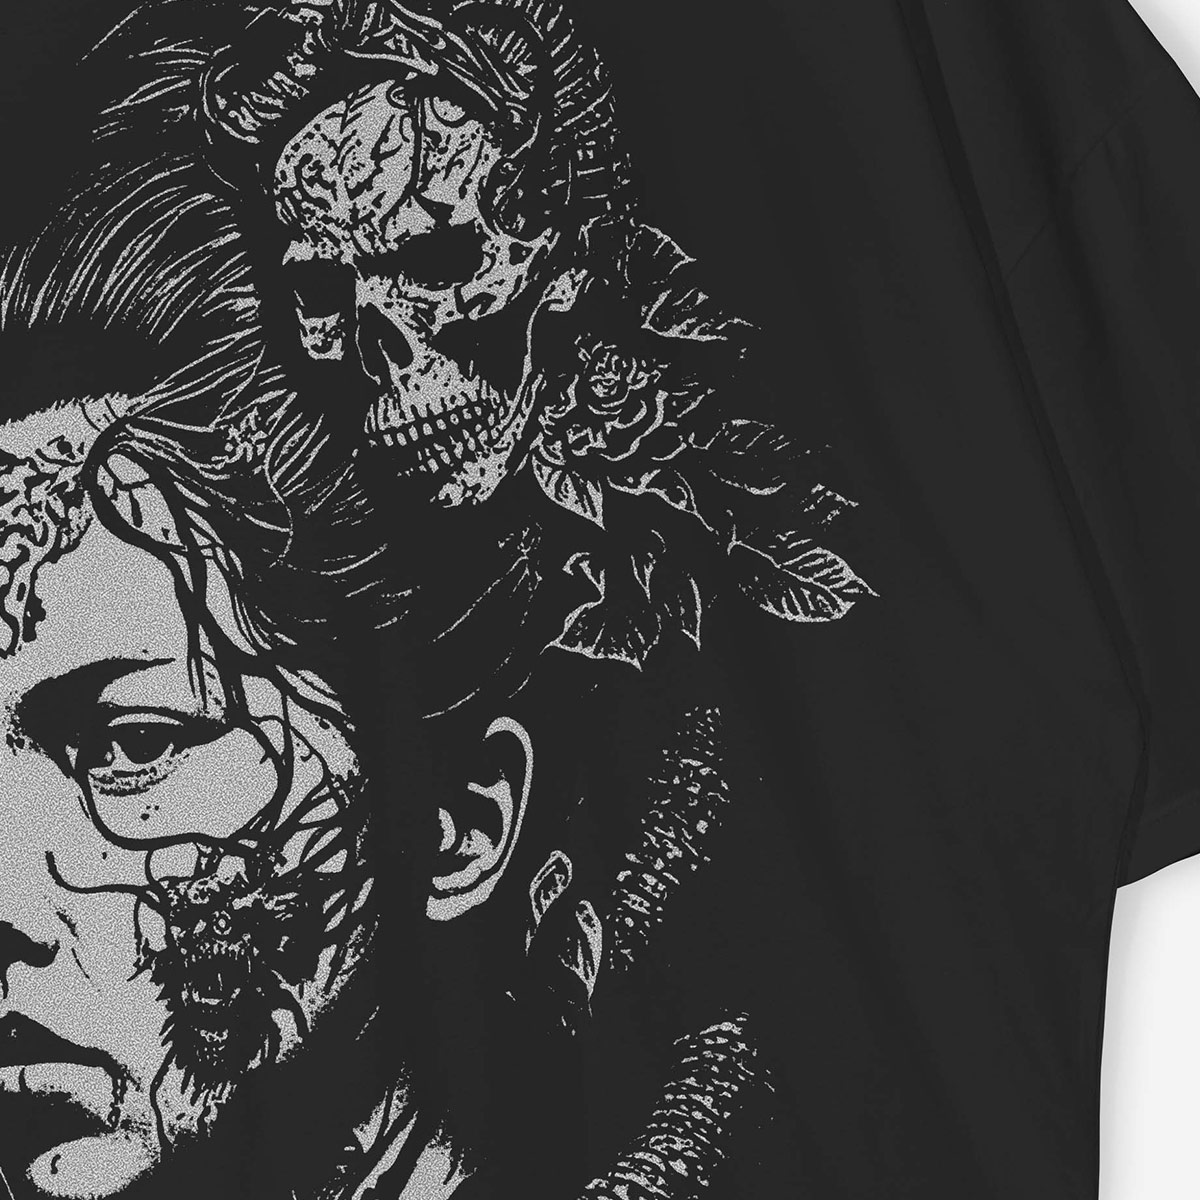 Black t - shirt with a drawing of a woman's face.